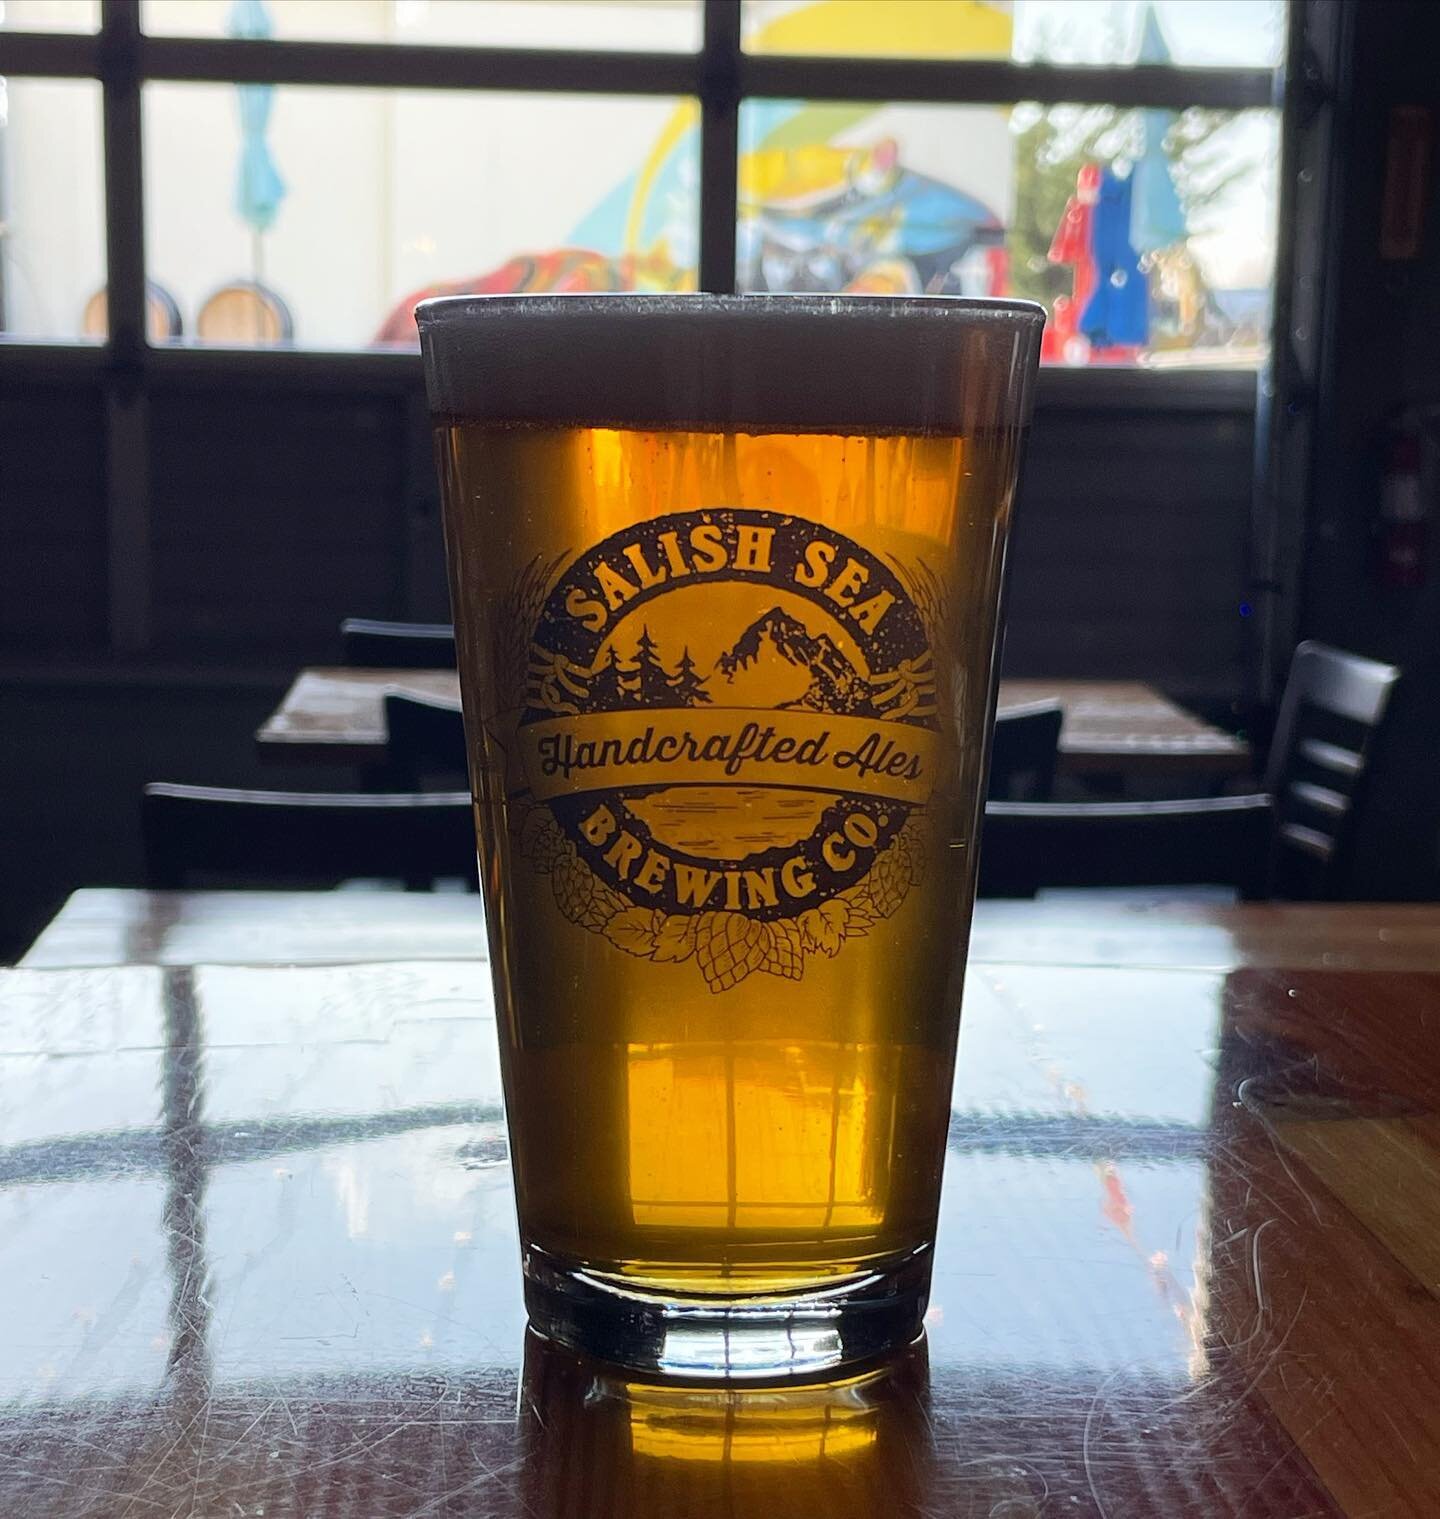 For those on the lookout for the elusive 2nd Edmonds/Kingston ferry, stop by either location and try our new Crow&rsquo;s Nest IPA while you wait.

Well balanced Northwest IPA with flavors and aromas of pine and citrus.  Hopped with Cascade, Citra, C